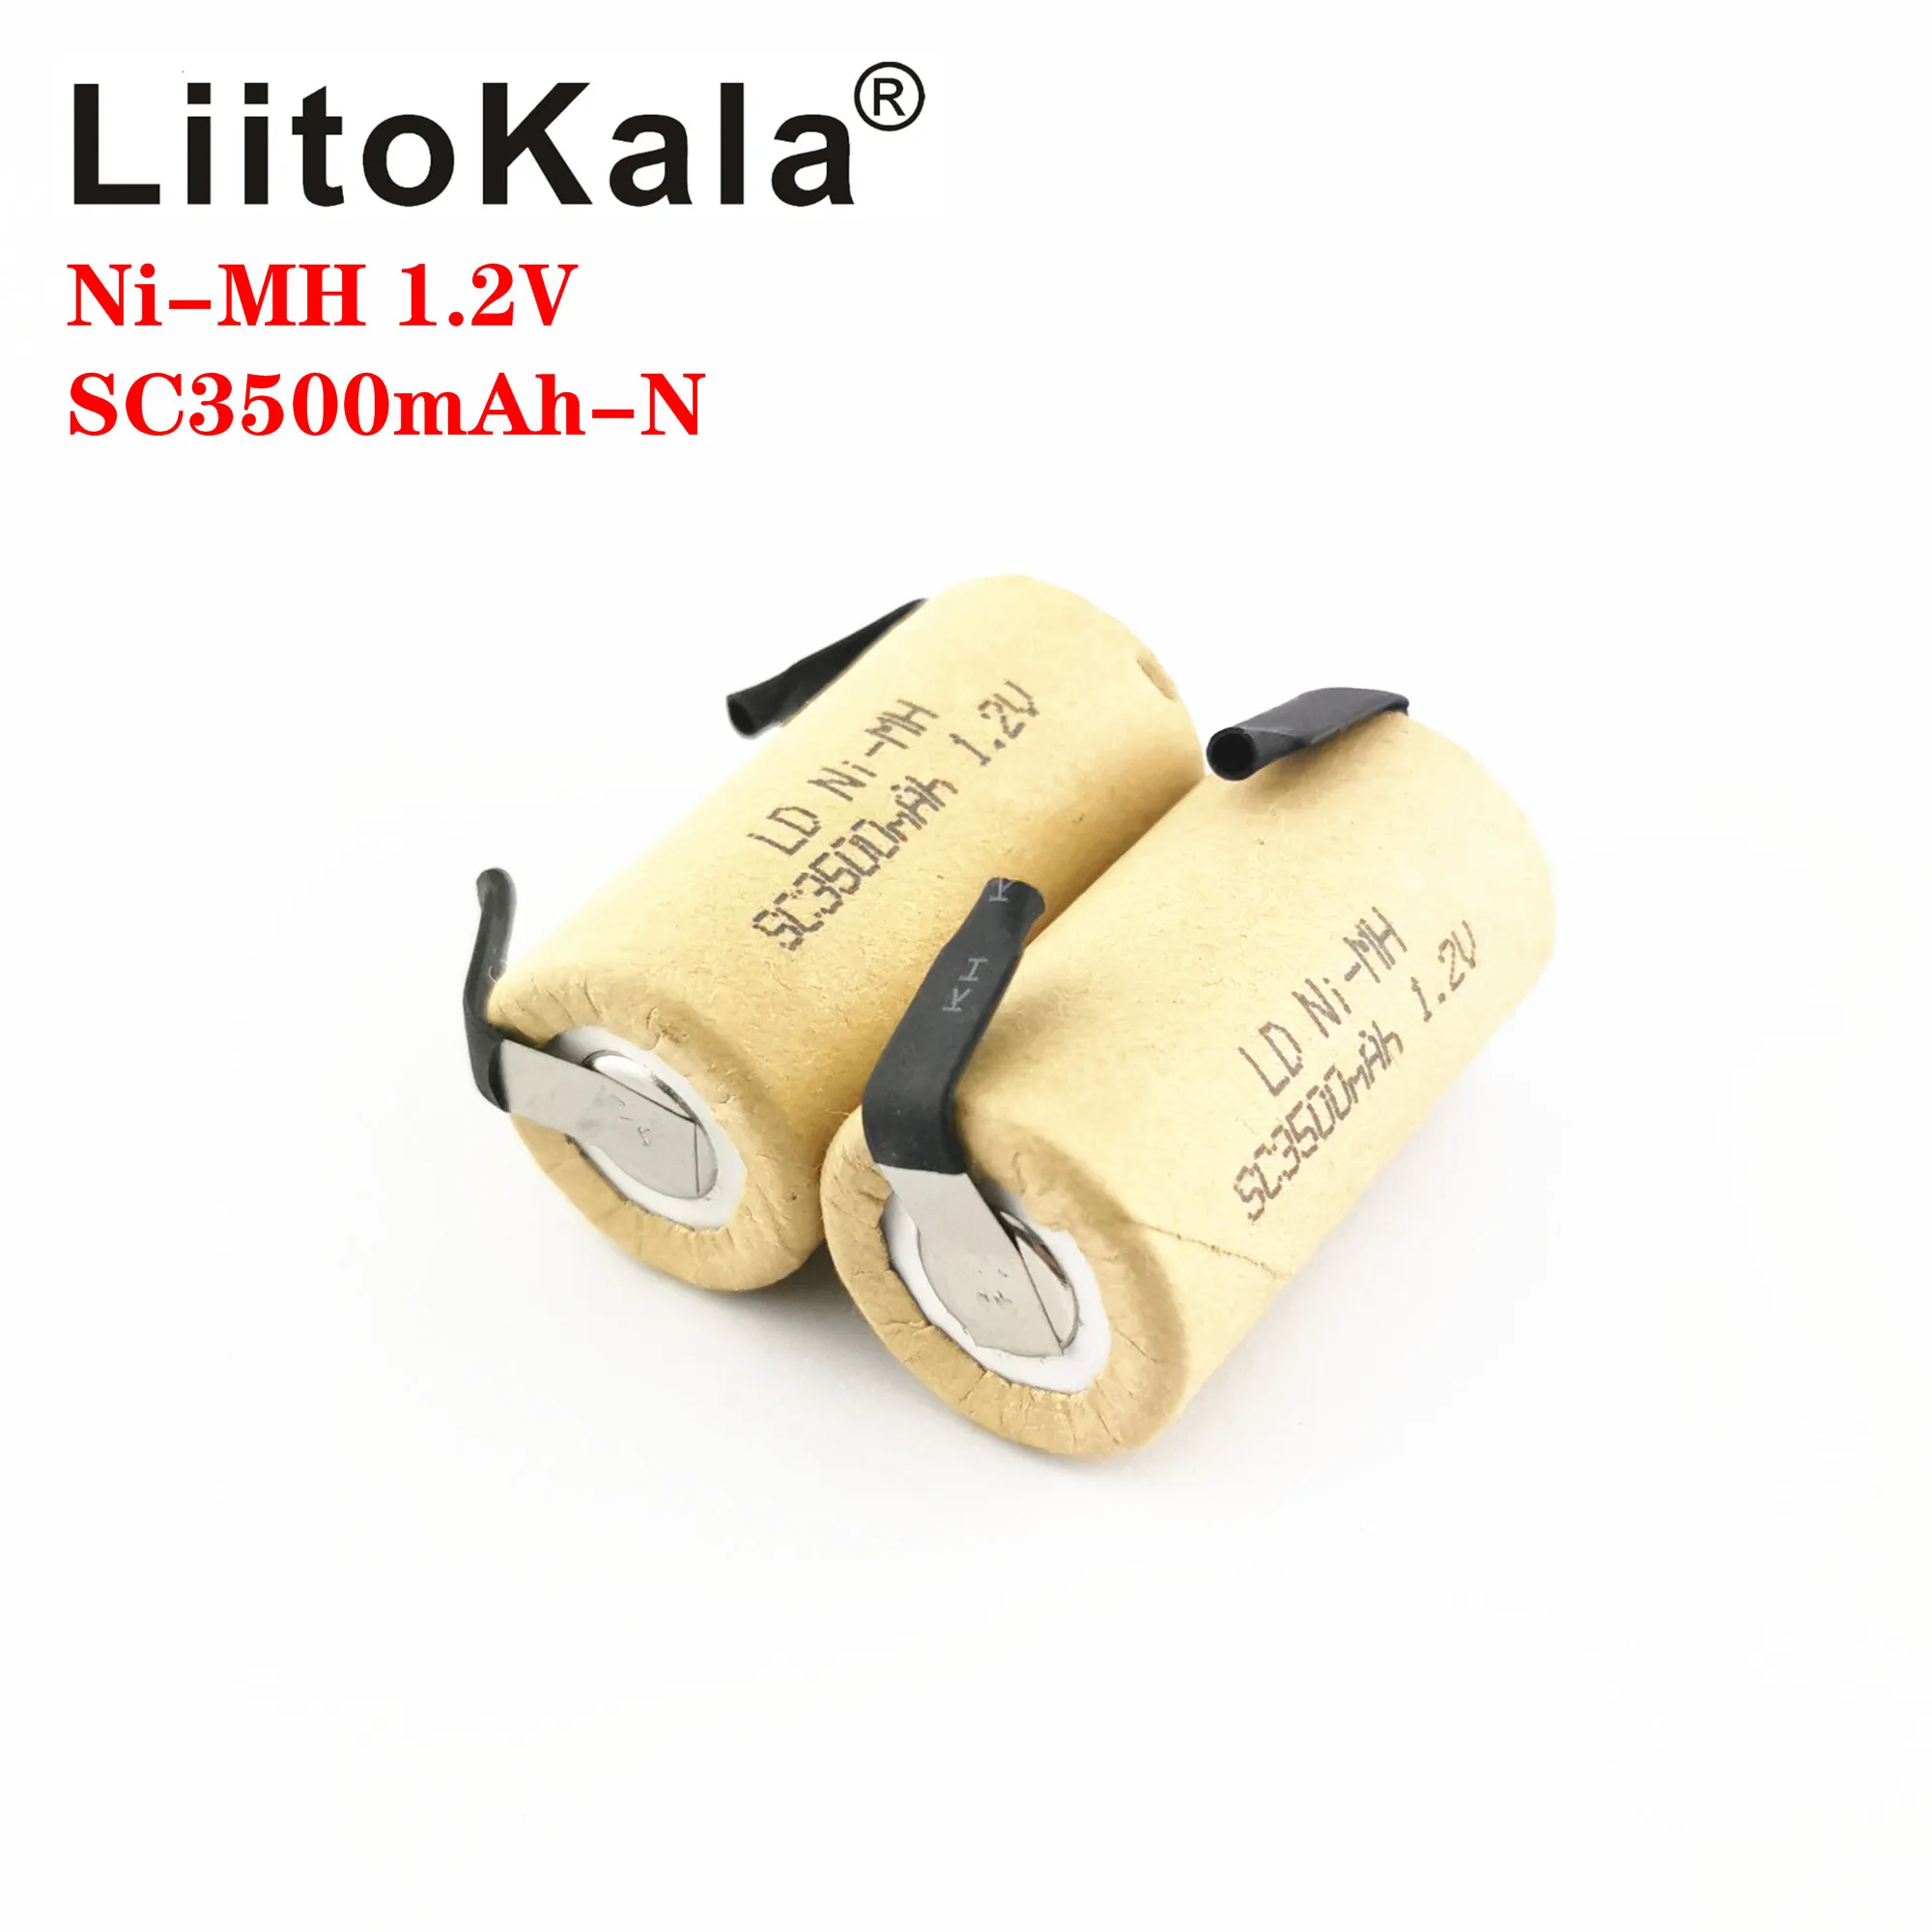 

LiitoKala SC 3500mAH NI-MH 1.2V Rechargeable Battery high discharge rate 10C 15C for Electric tools Power Tool battery DIY nicke